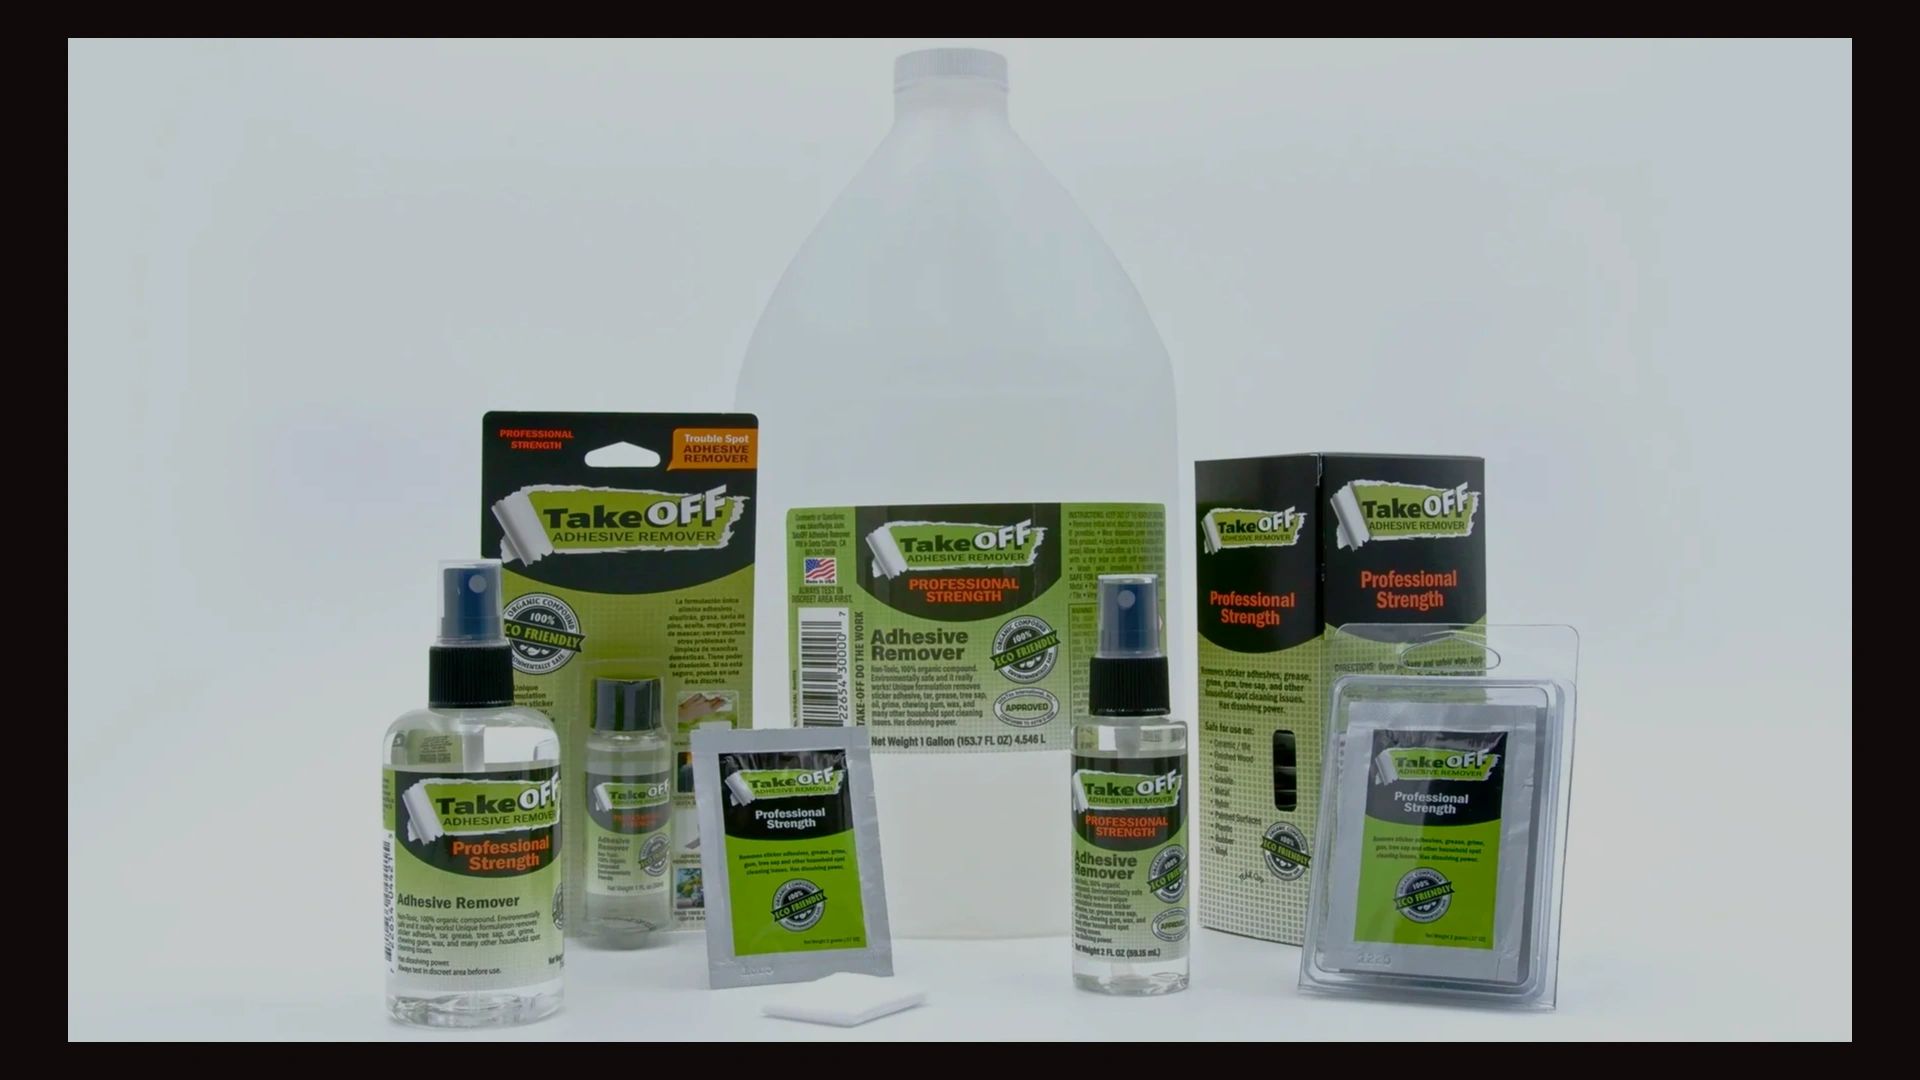 A range of products, which specializes in glue removal. Several packaging options for purchase.